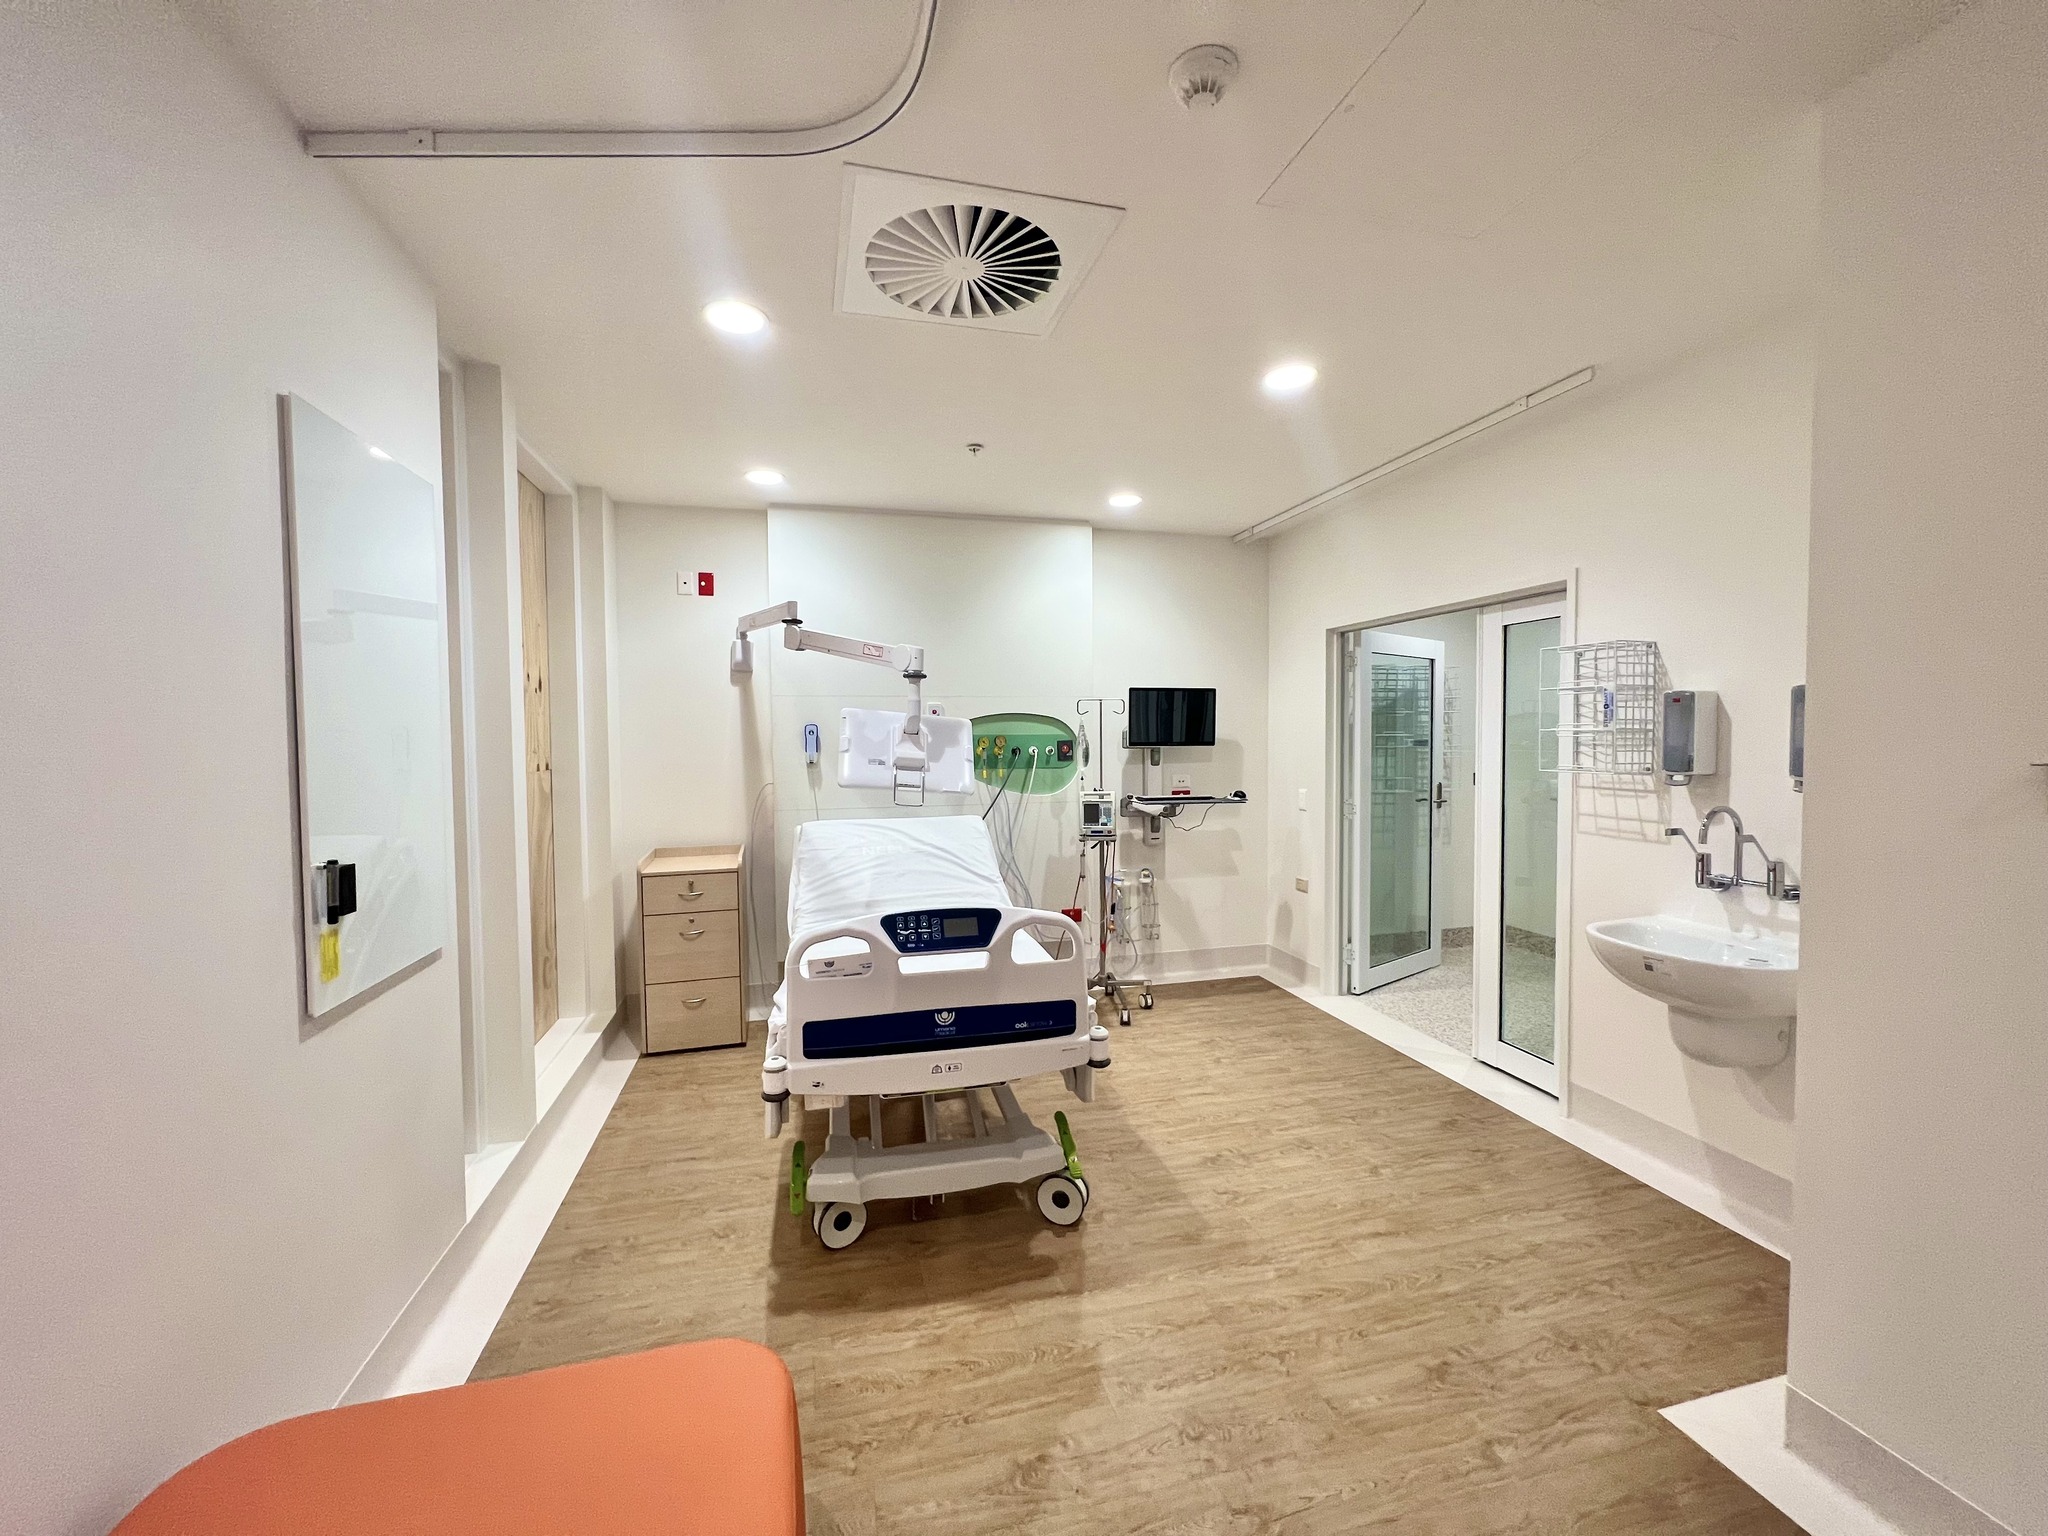 New prototype rooms provide a sneak peek into the future of paediatric healthcare in NSW